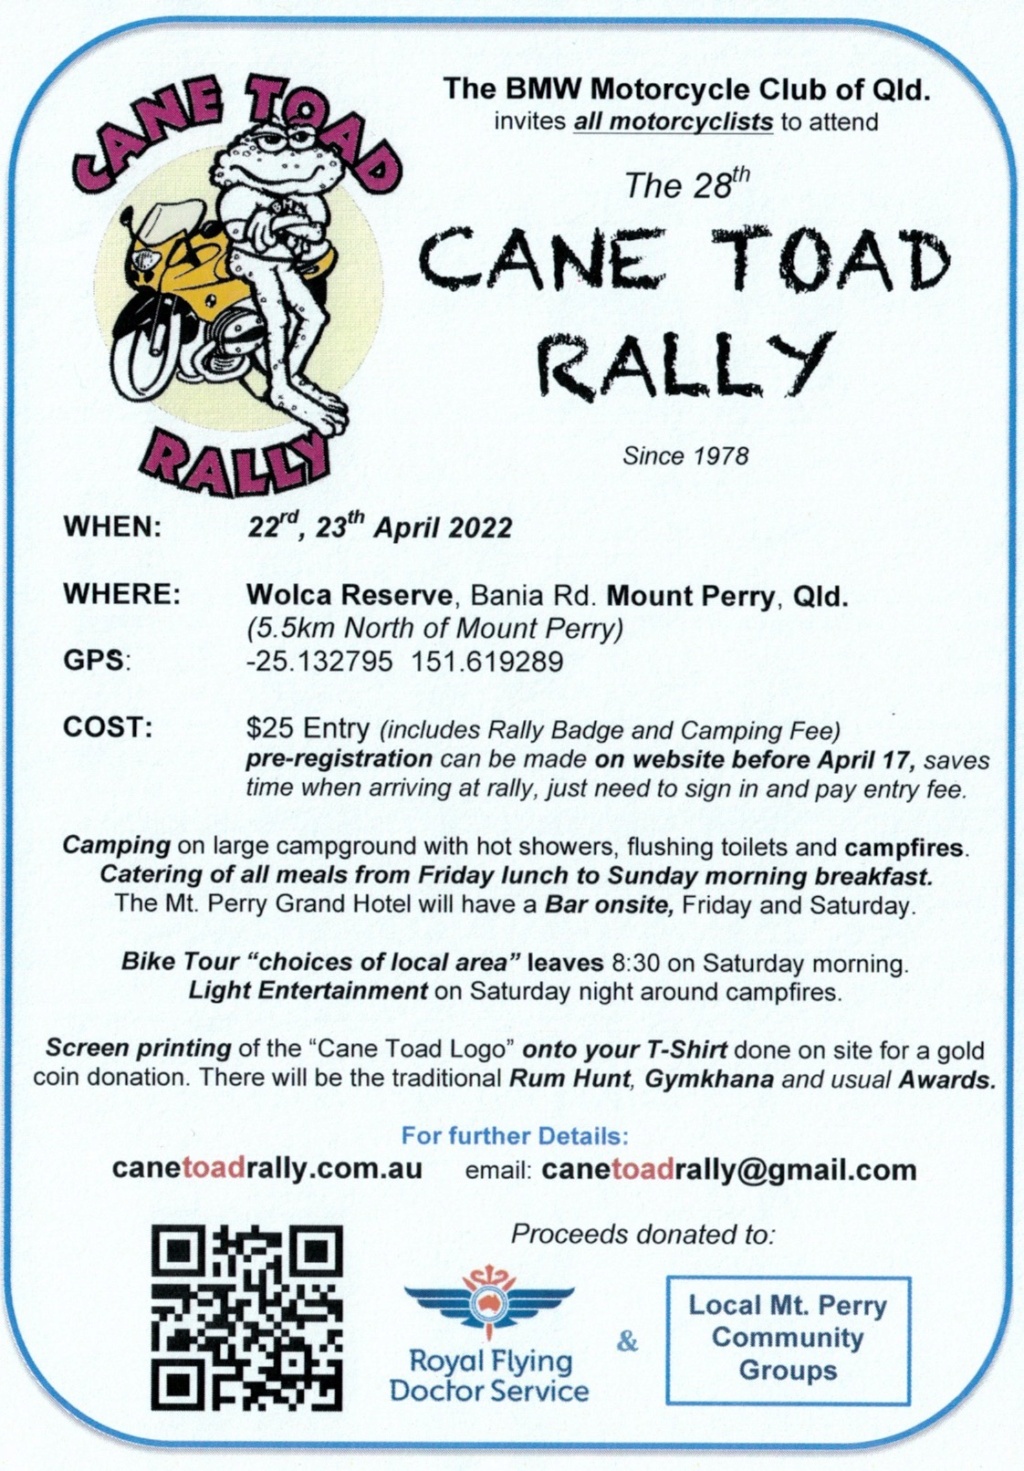 Cane Toad Rally 2022 Ctr_2010